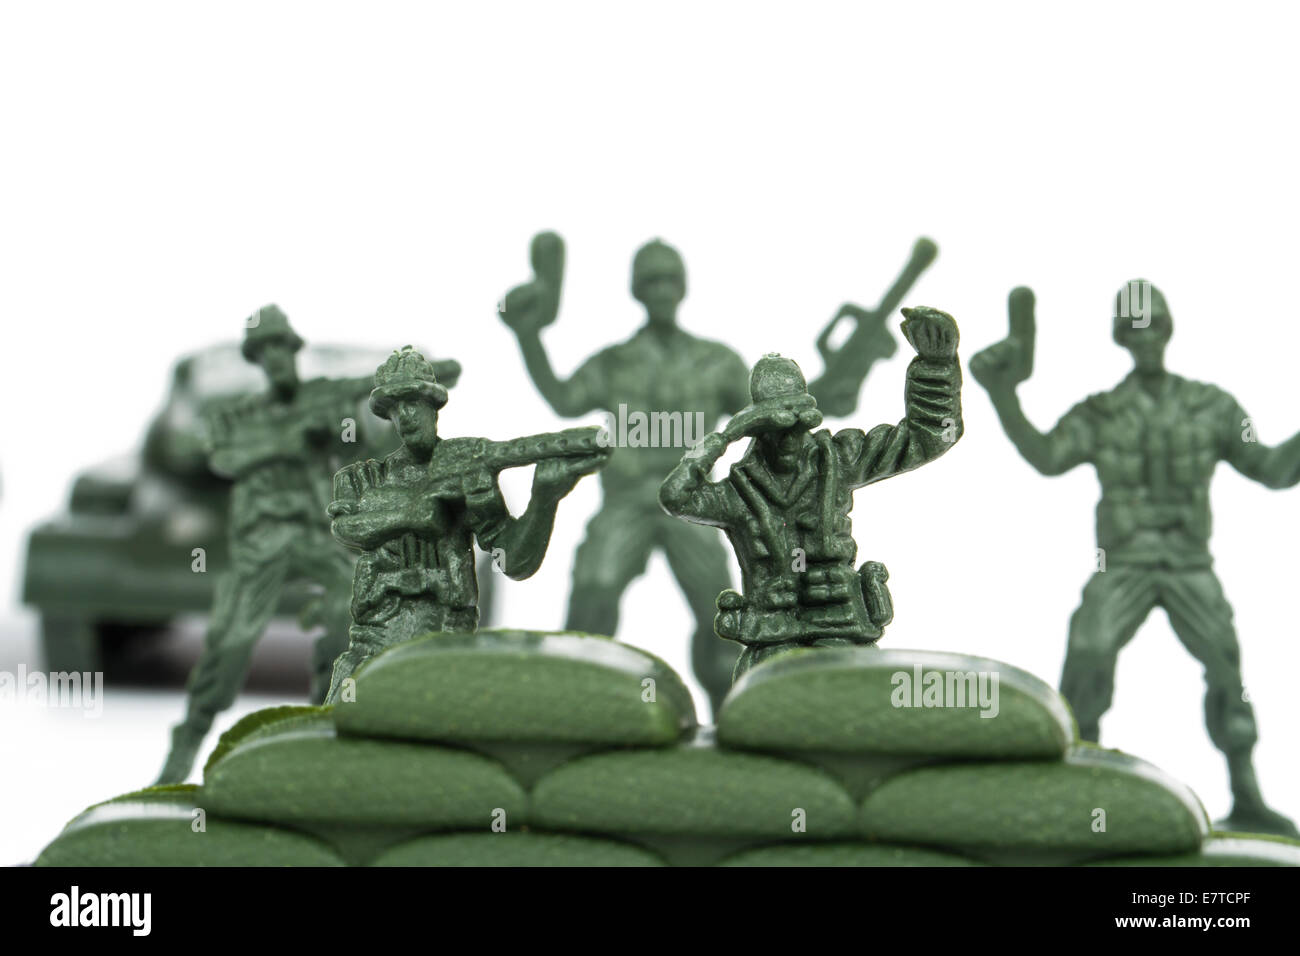 Miniature toy soldiers, isolated on white background. Stock Photo